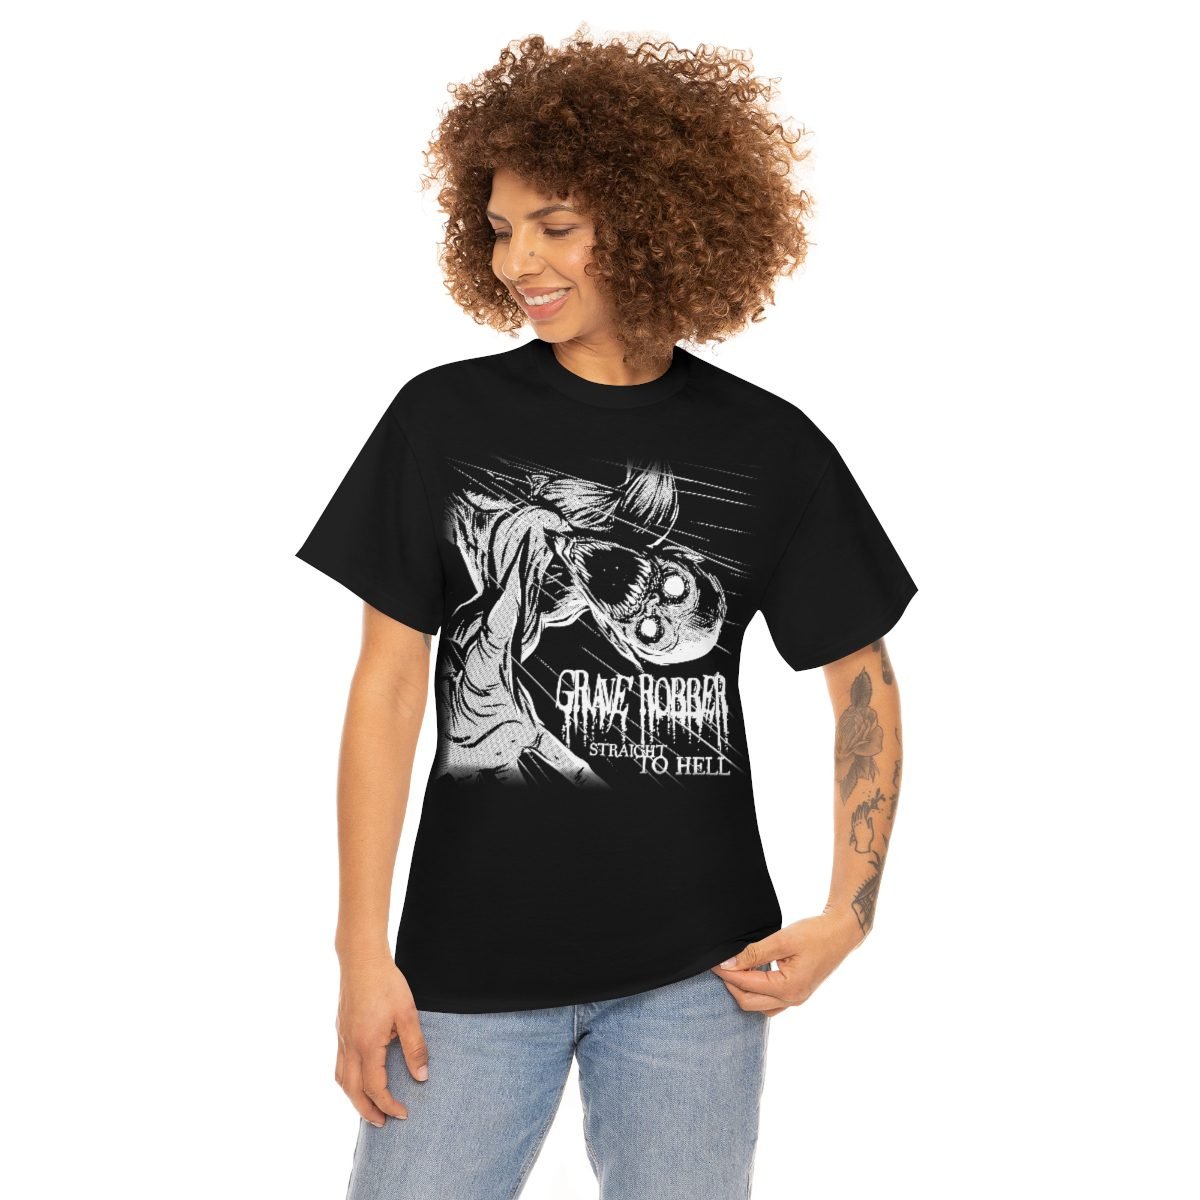 Grave Robber – Straight to Hell Short Sleeve Tshirt (5000)